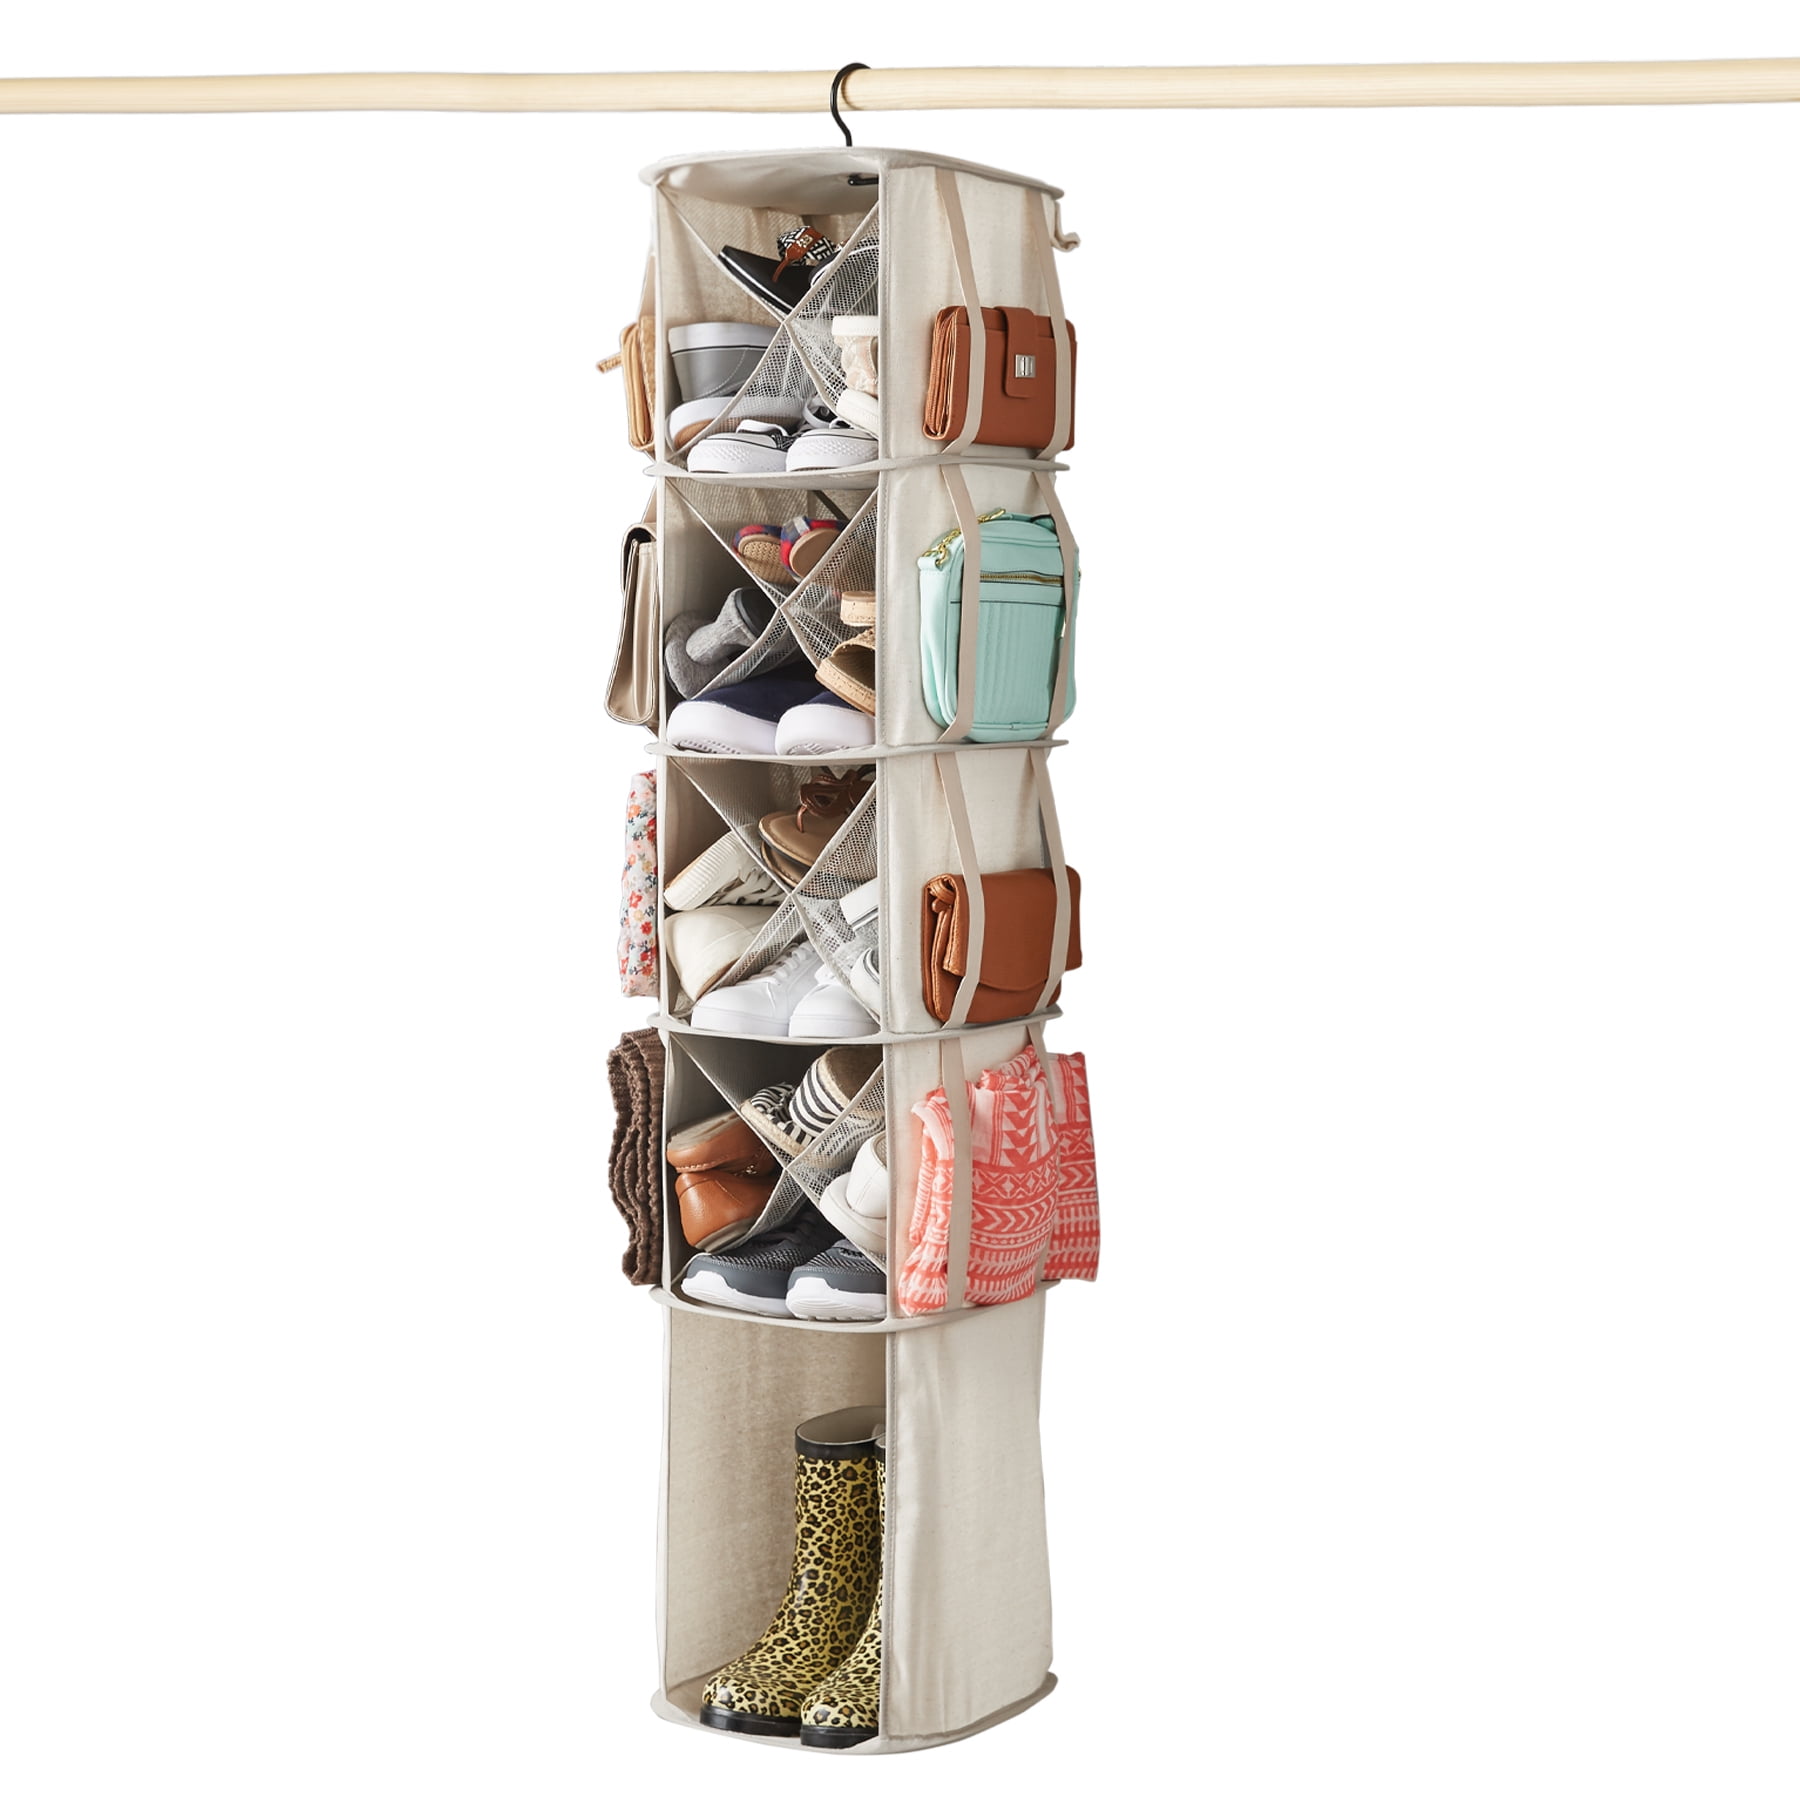 Mainstays 5-Tier/16-Pair Shoe Canvas Carousel Organizer - Great for Bedroom Closets and Organization